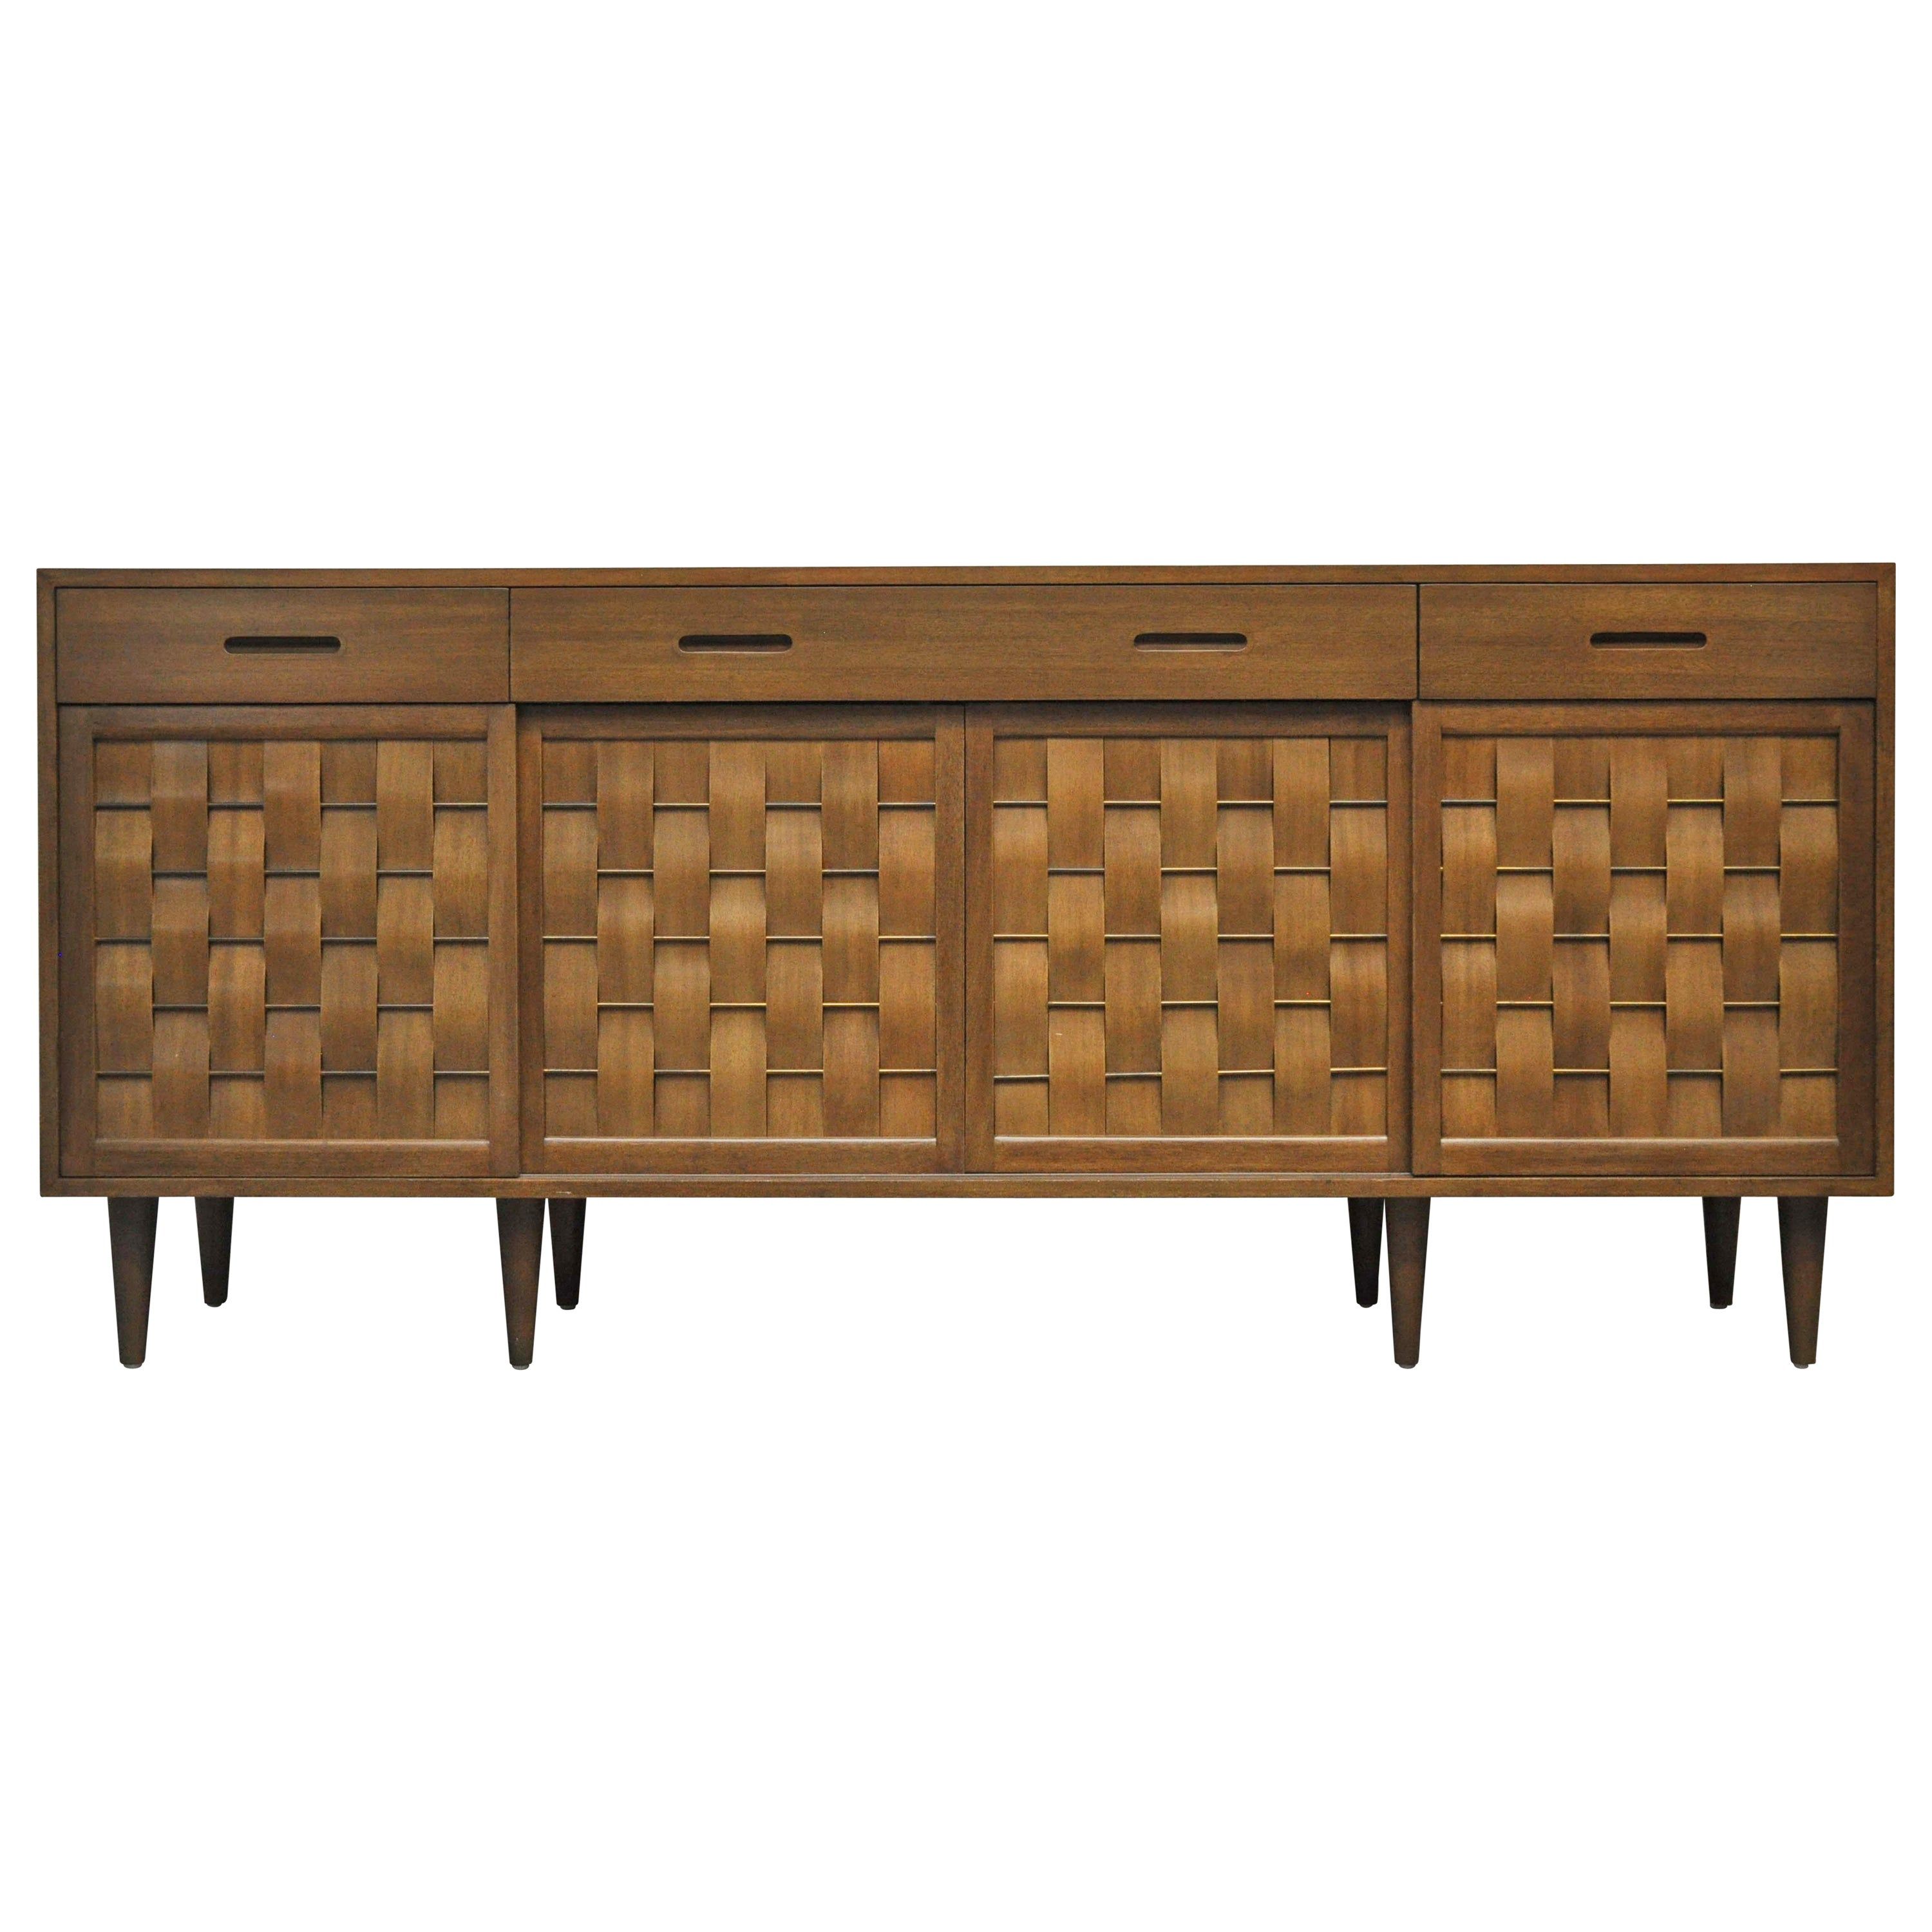 Edward Wormley Sideboards – 38 For Sale At 1stdibs With Regard To Gertrude Sideboards (View 25 of 30)